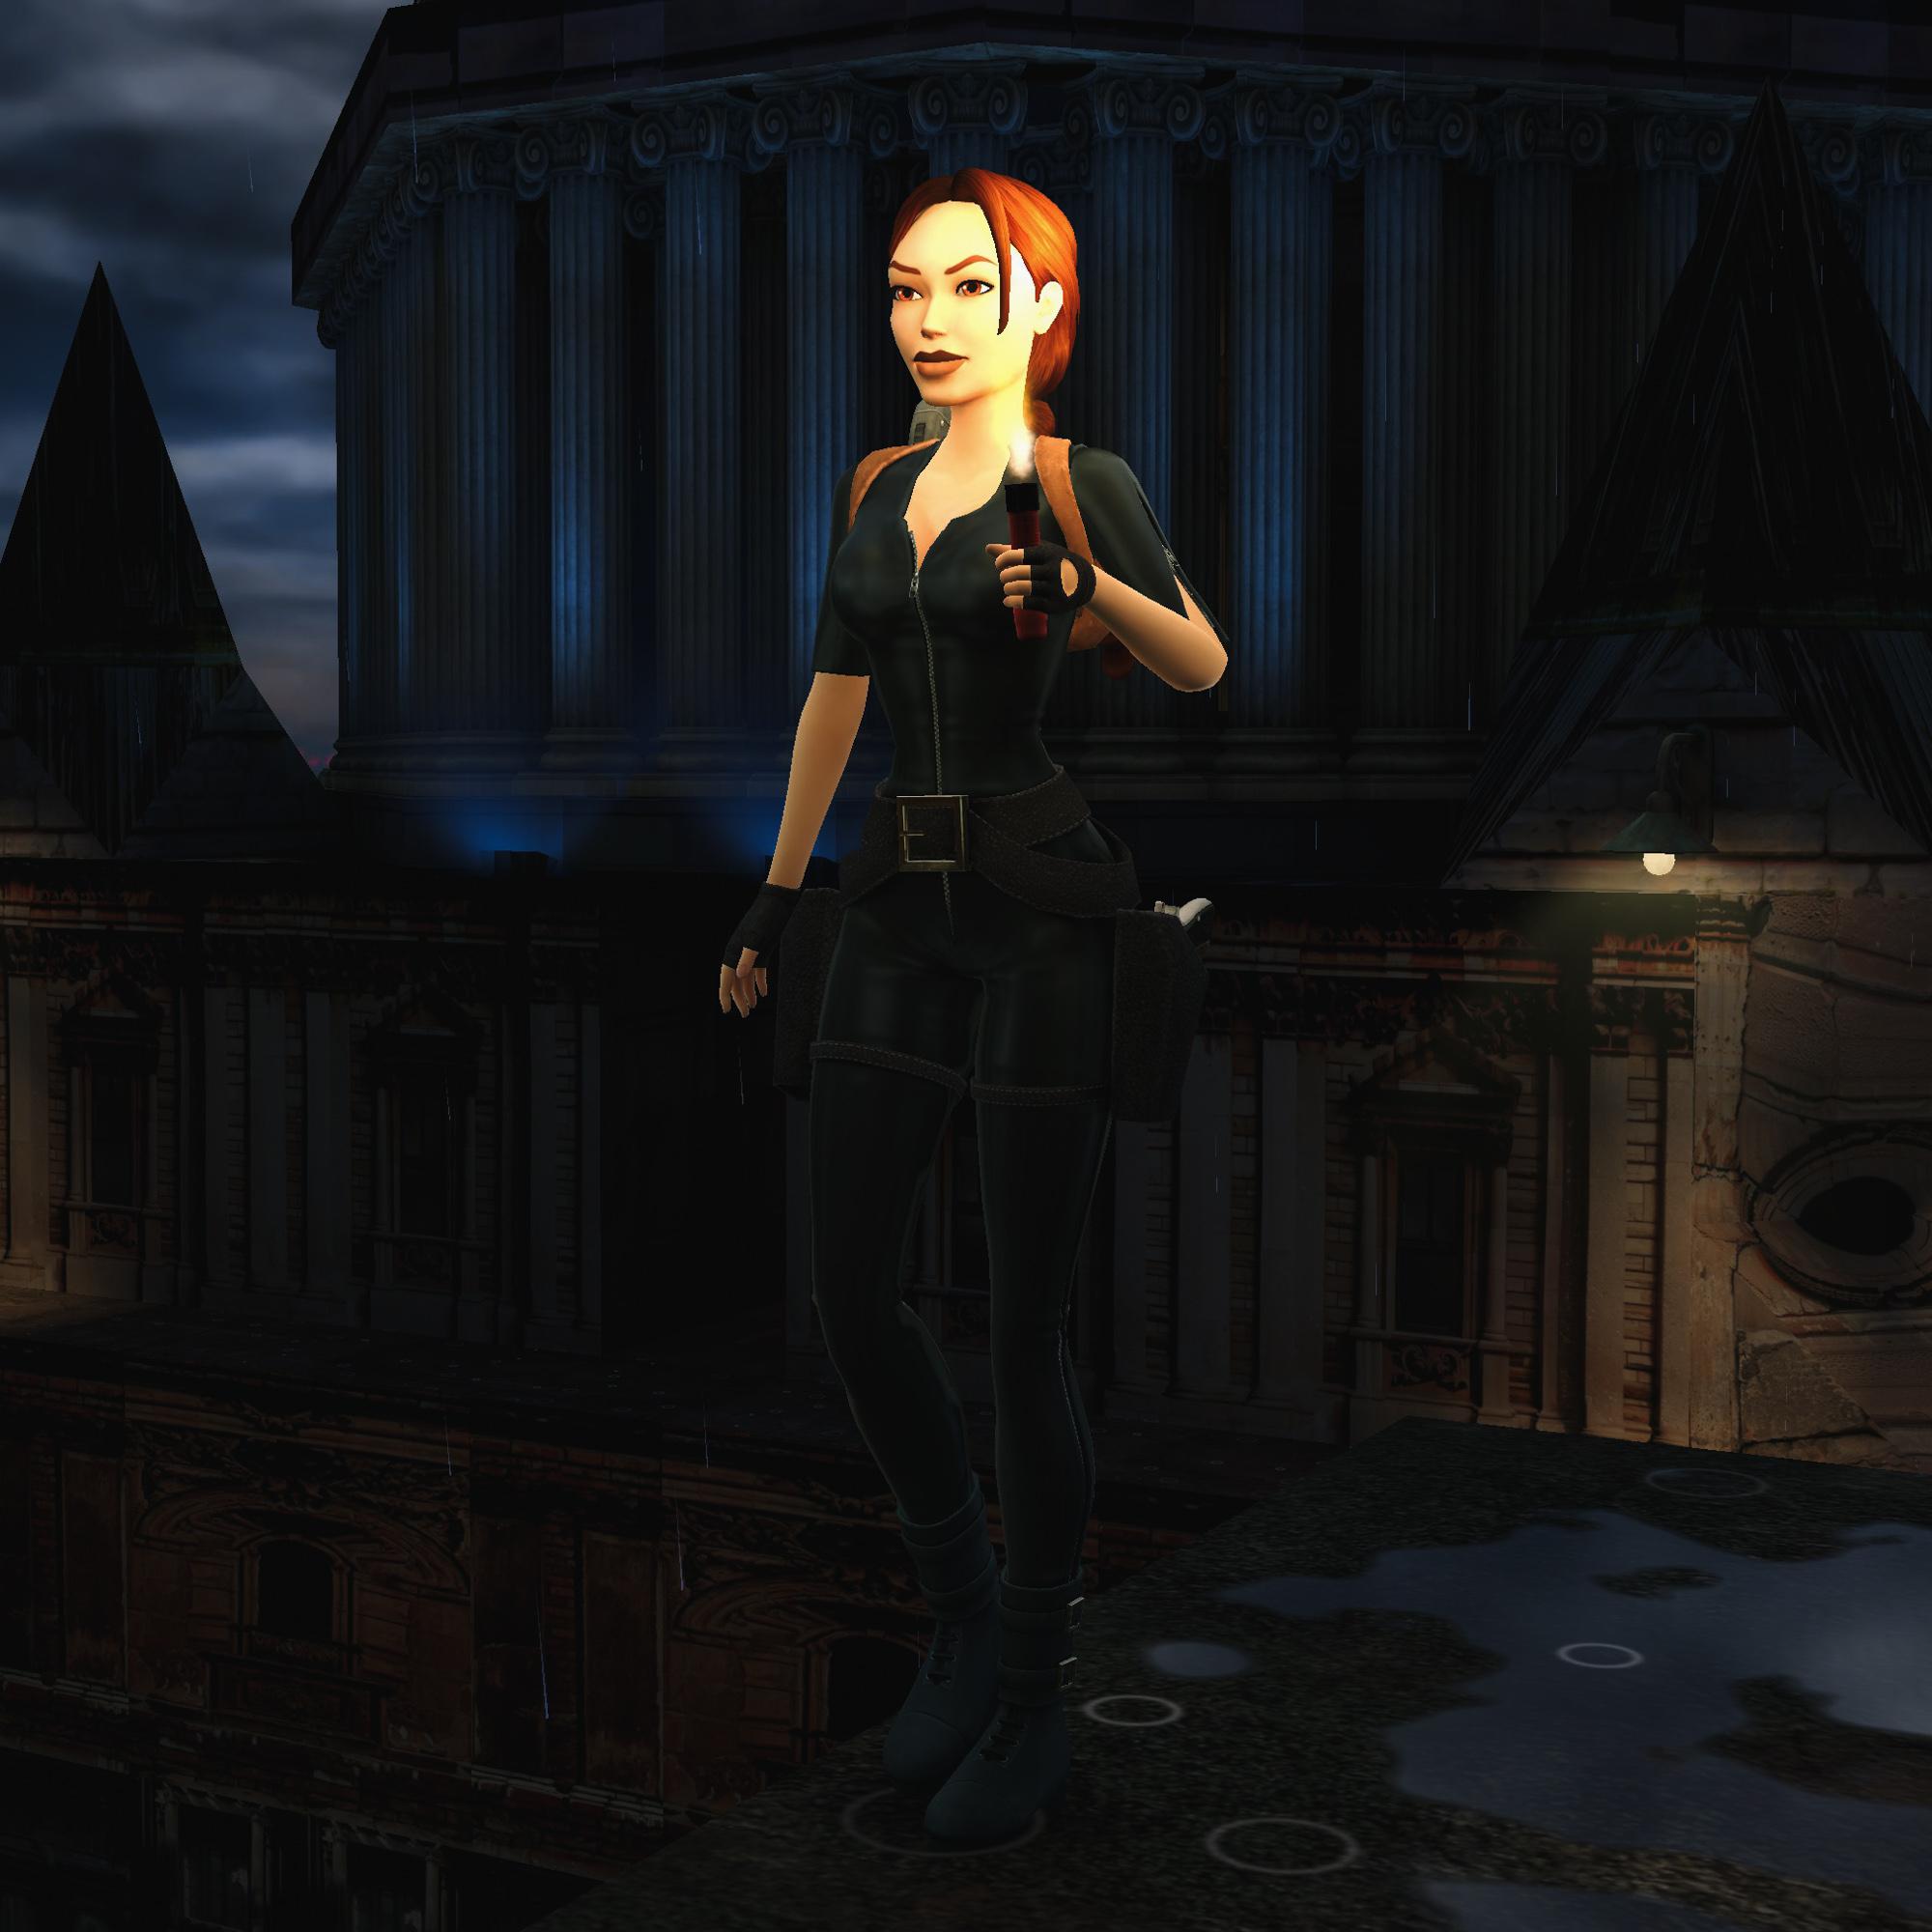 Lara Croft holding a lit flare on the roofs in London next to St. Paul's Cathedral.